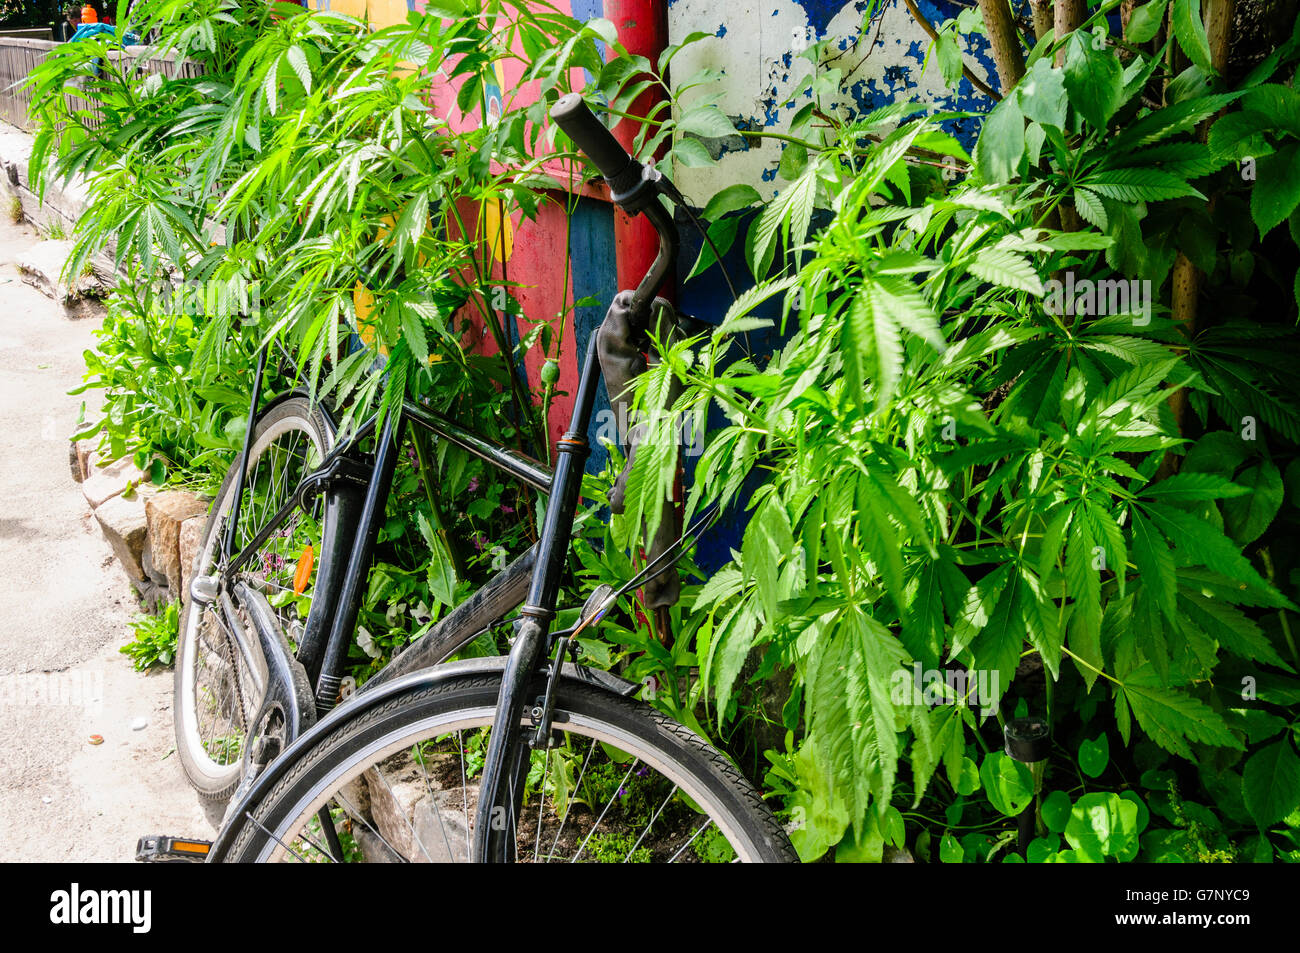 A bicycle is parked up against marijuana bushes in a garden in Freetown Christiana, Copenhagen. Stock Photo